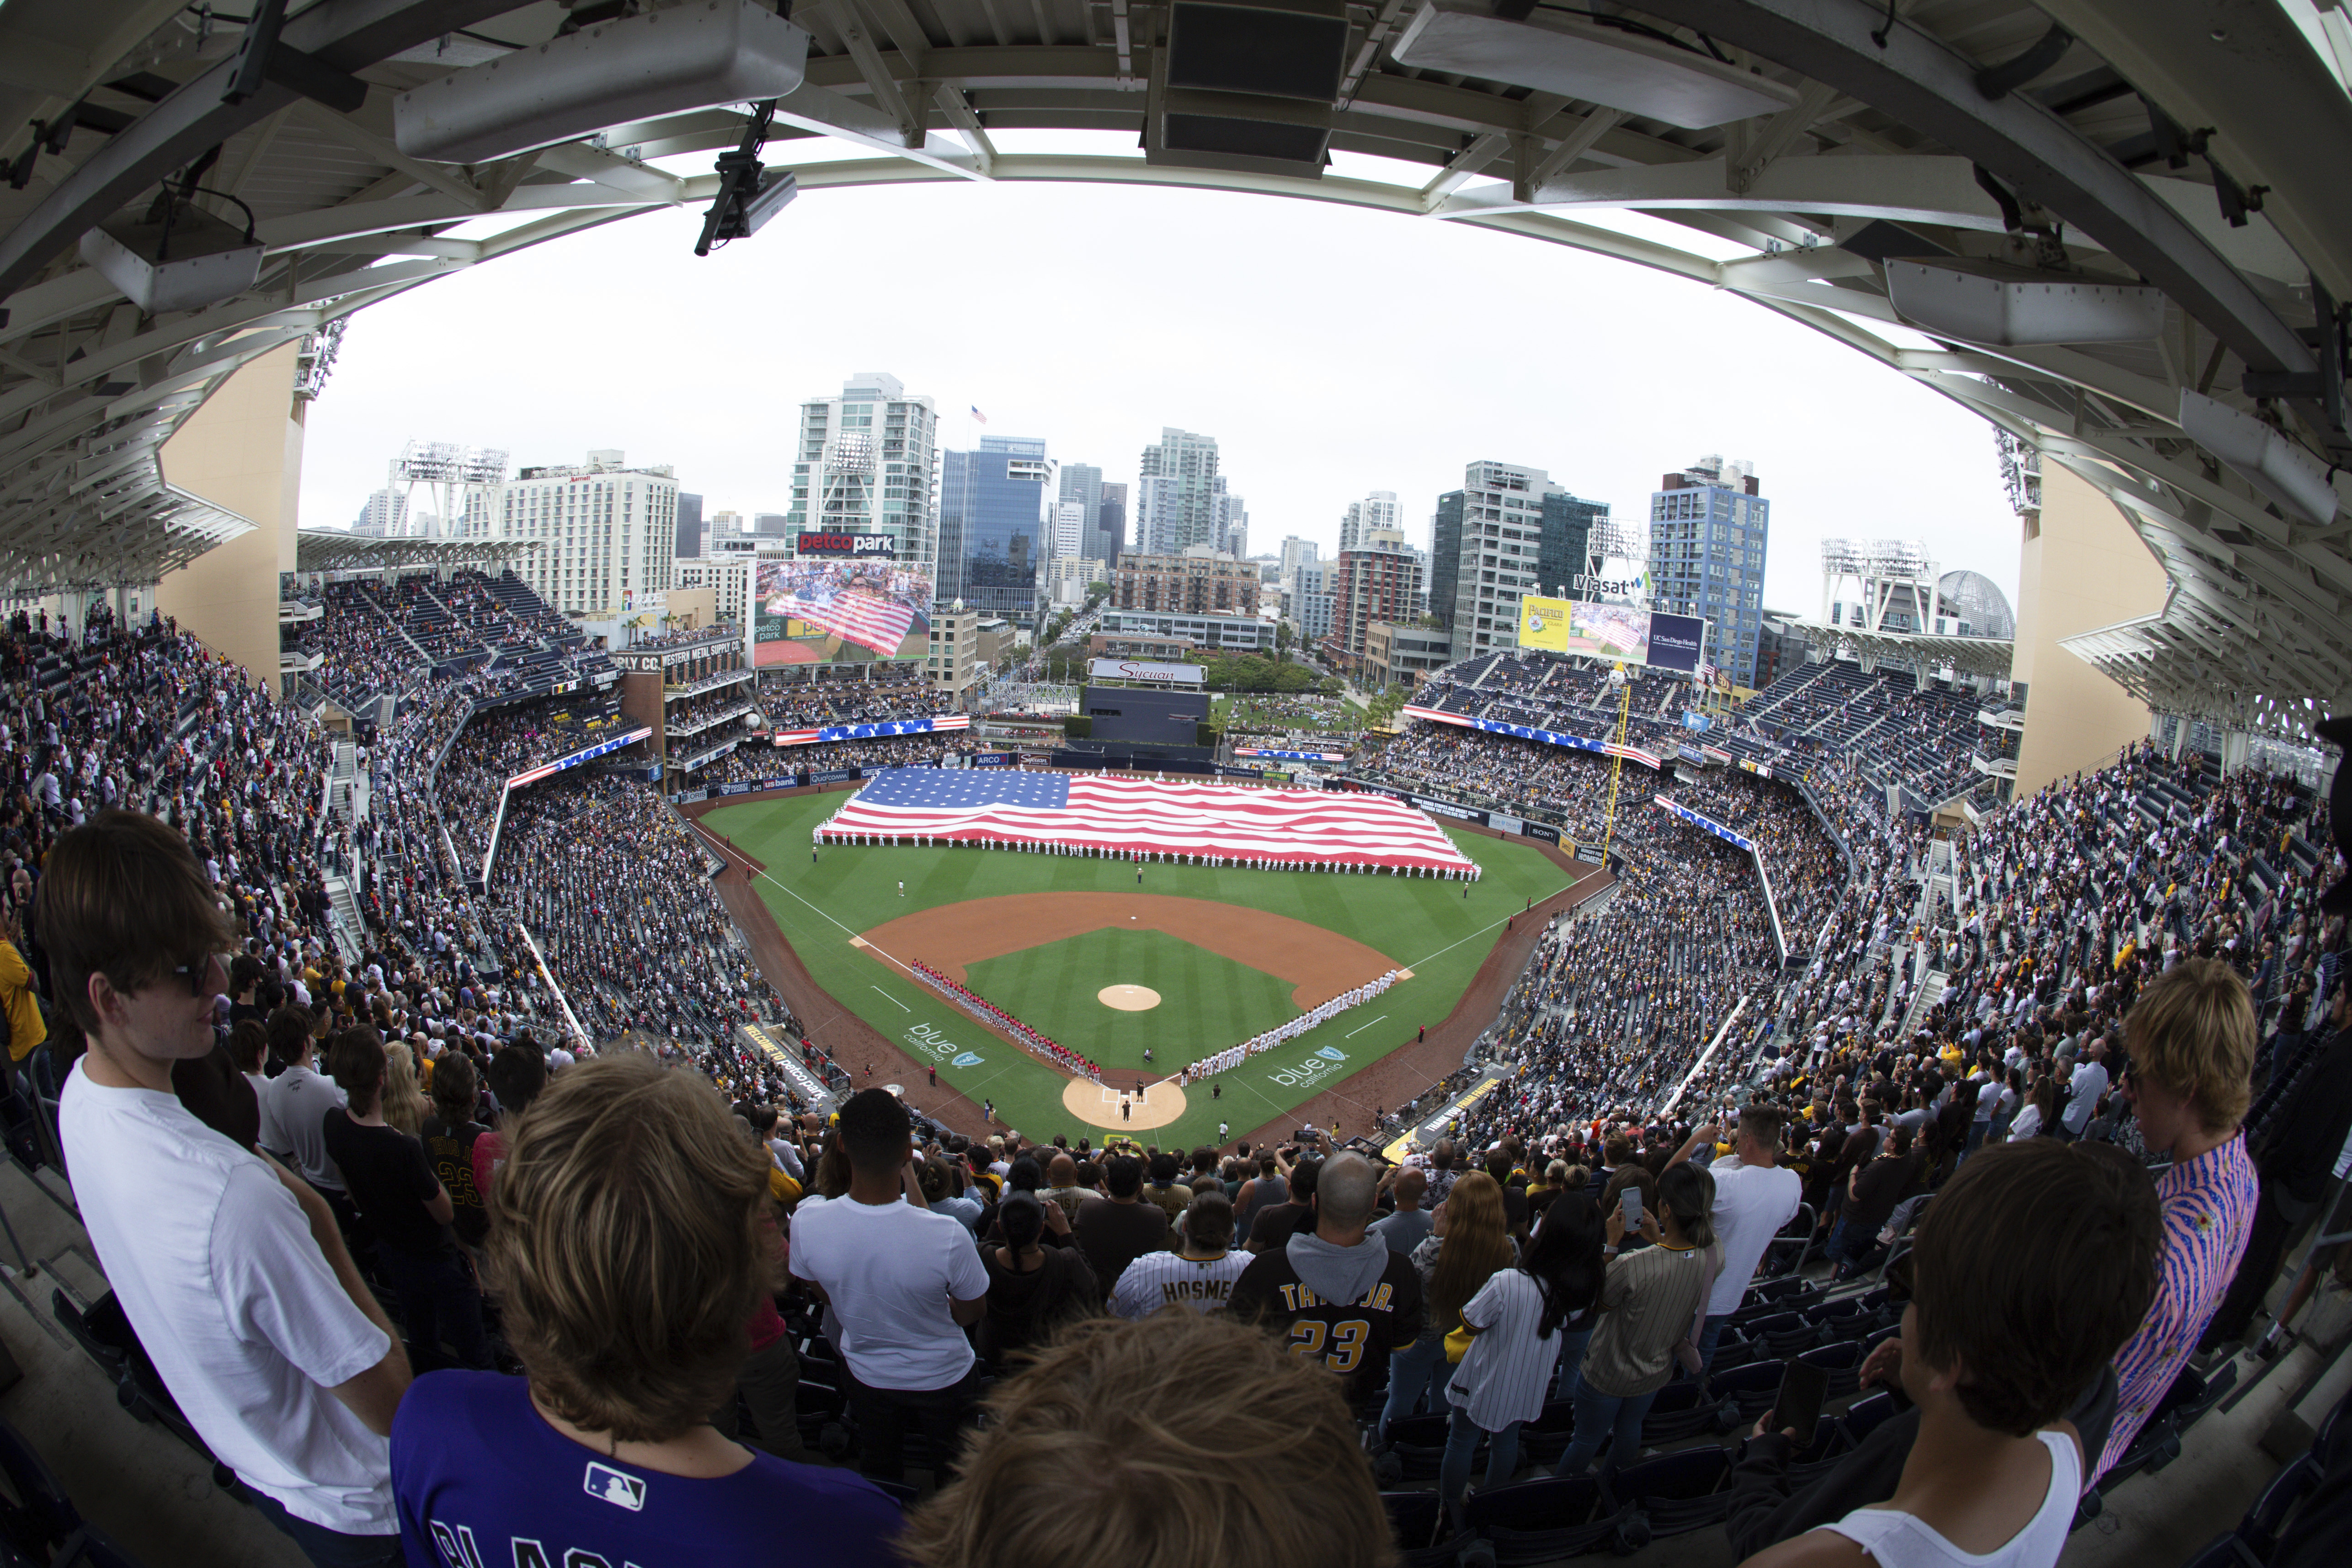 Petco Park set to return to 100% capacity for Padres games